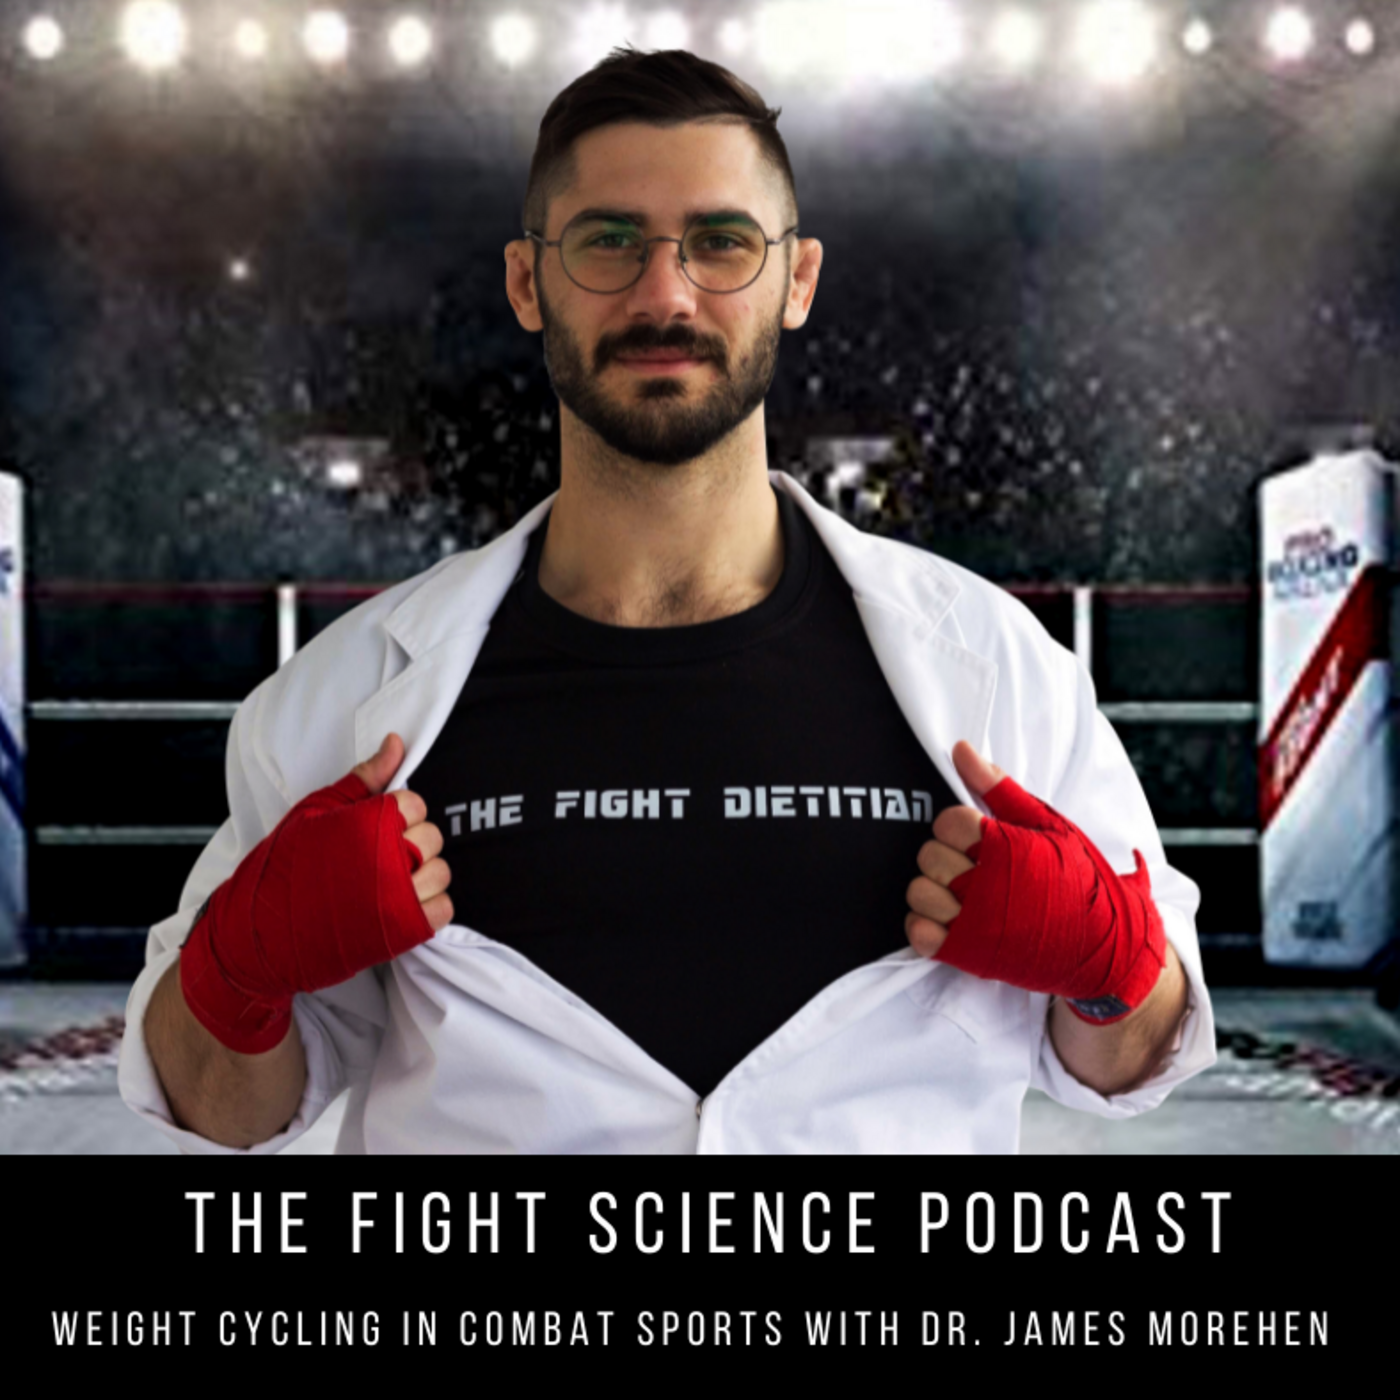 Episode 94: Weight Cycling in Combat Sports with Dr. James Morehen